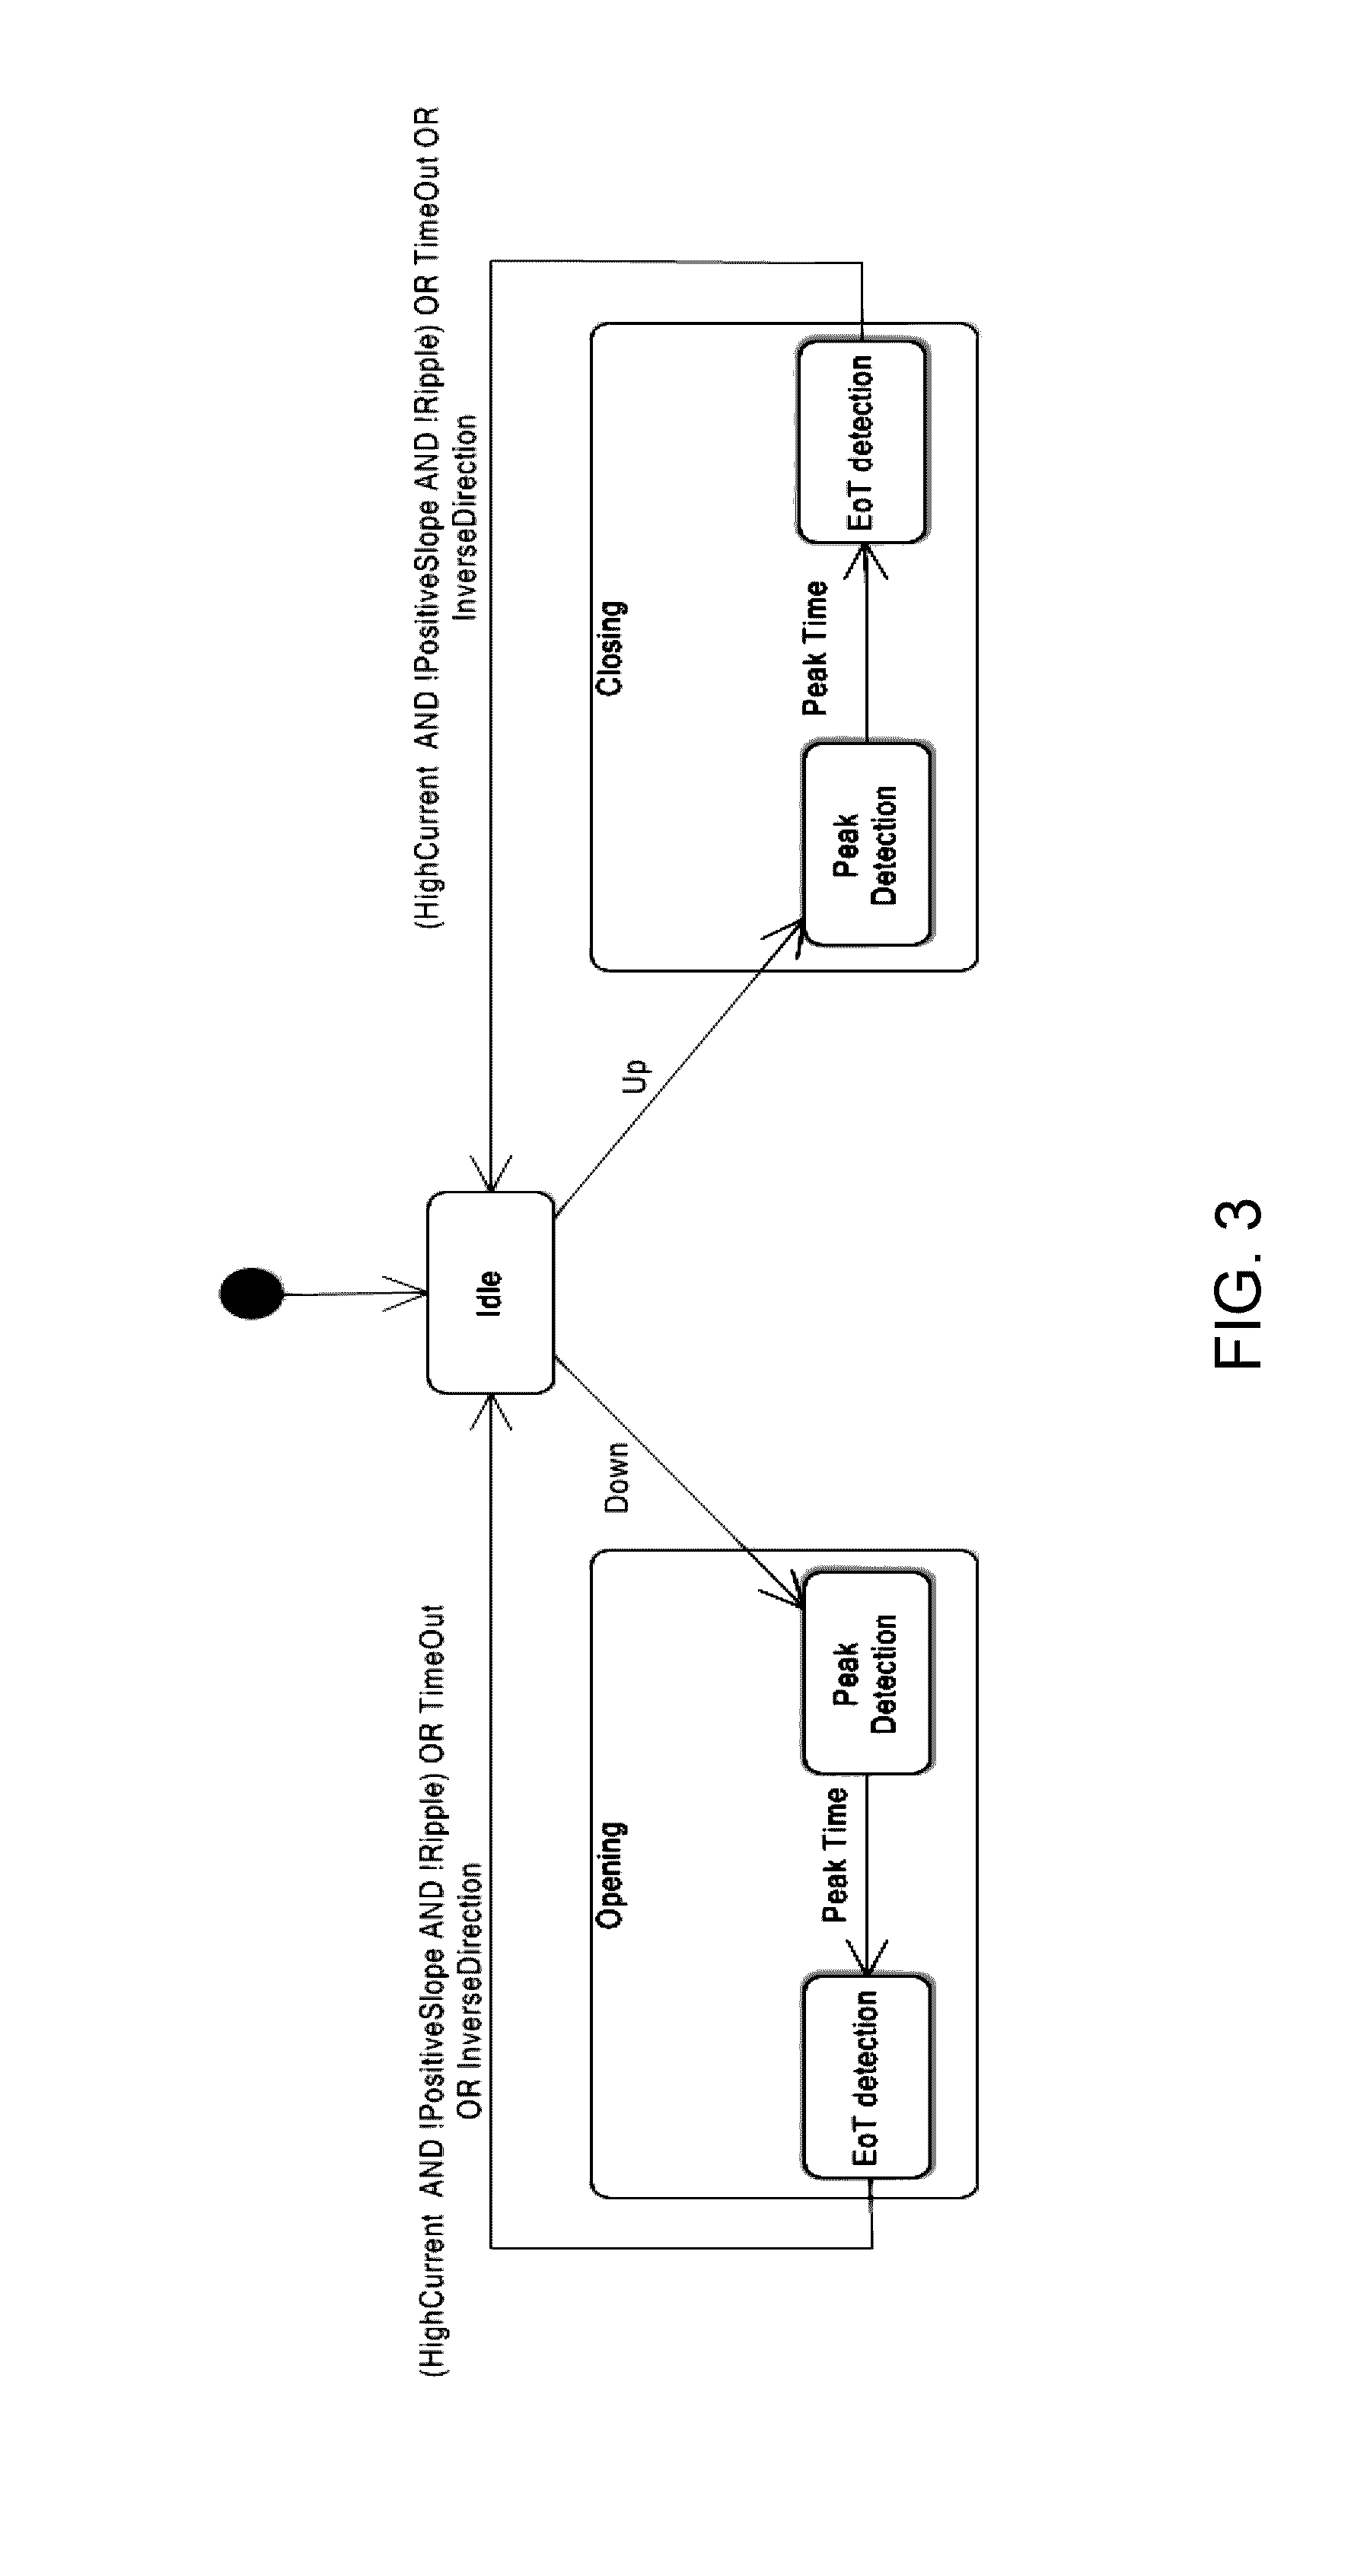 Automotive electrically-actuated device end-of-travel detection